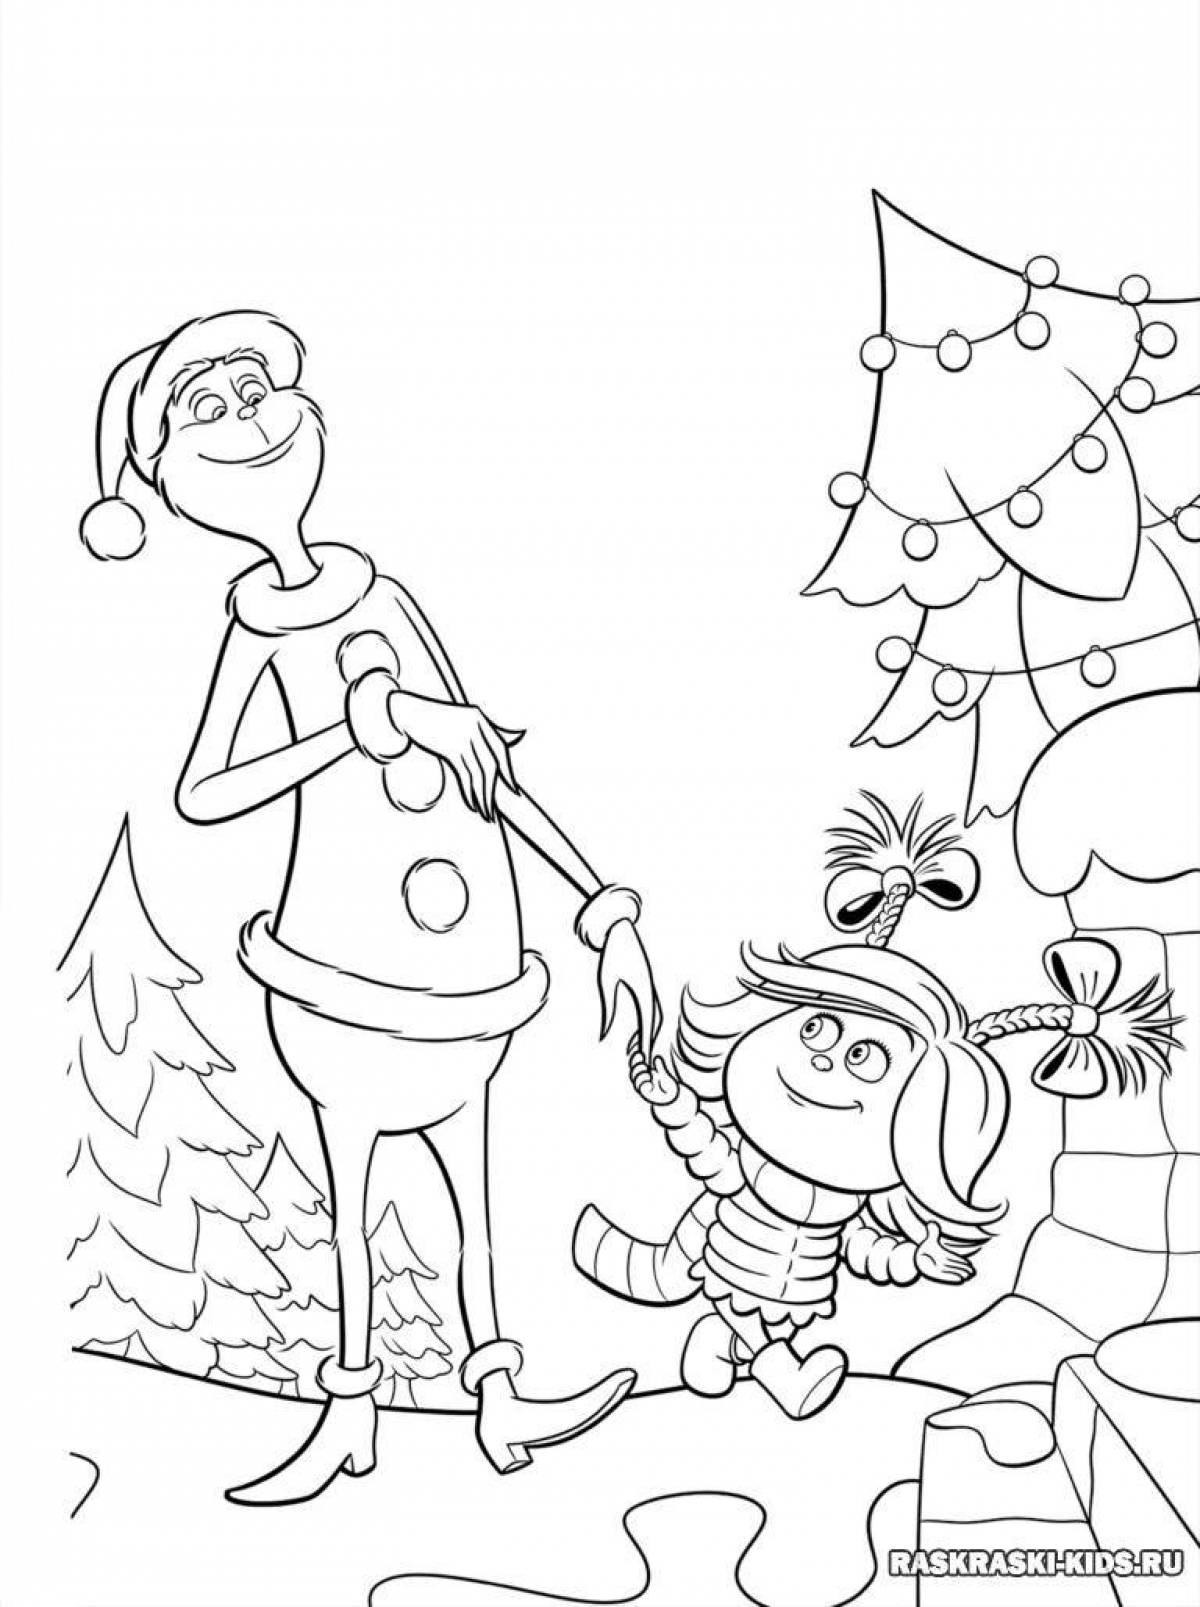 Animated grinch face coloring page